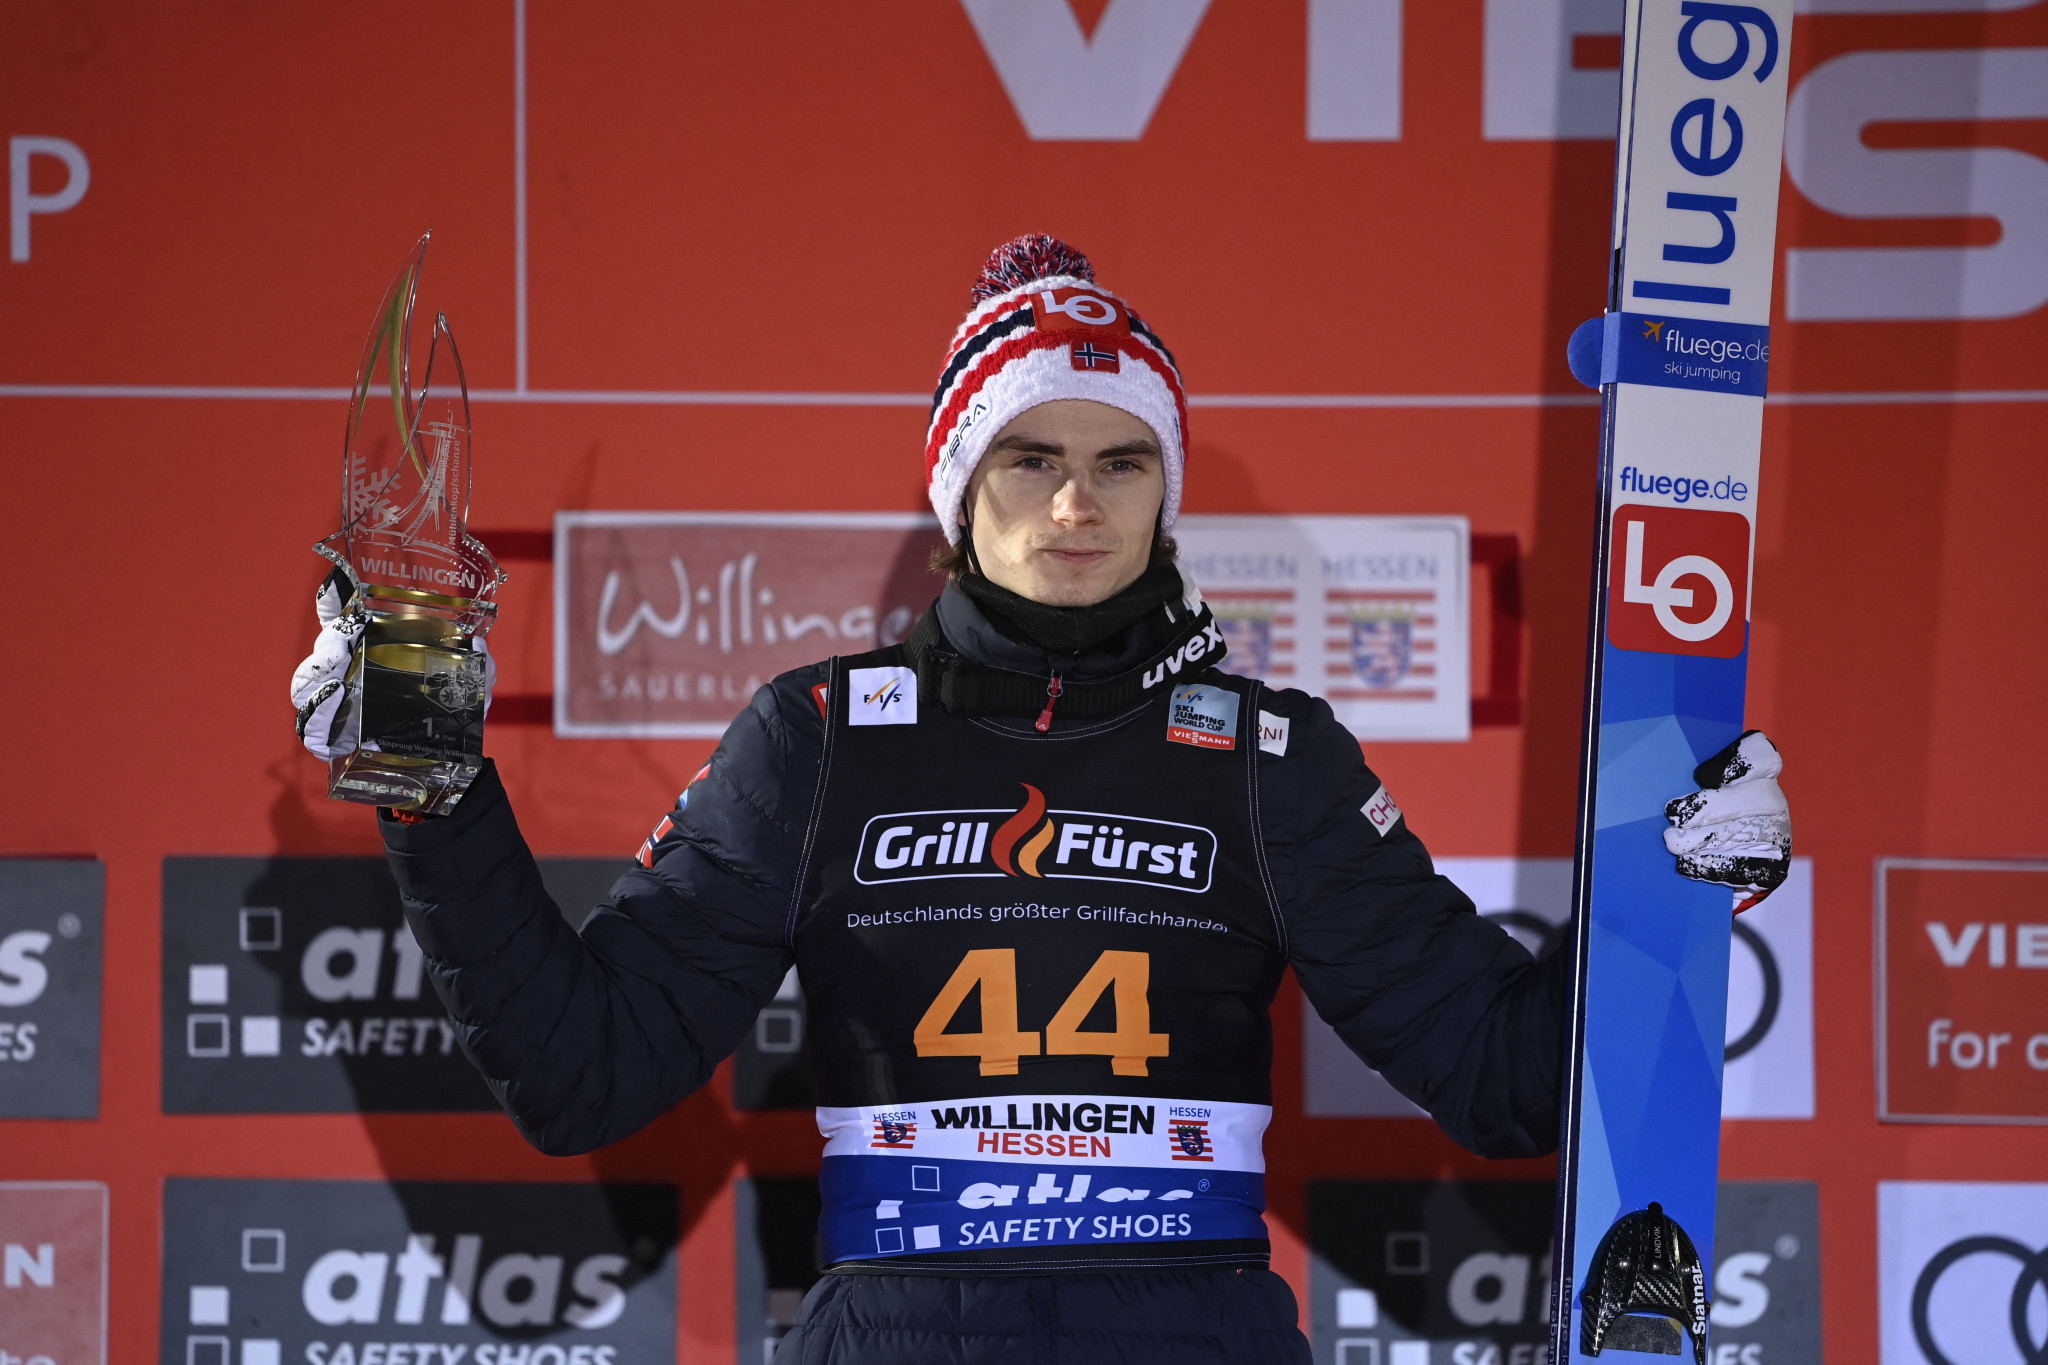 Norway's Marius Lindvik won the men's Ski Jumping World Cup contest in Willingen to move within seven points of the overall top three ©Getty Images